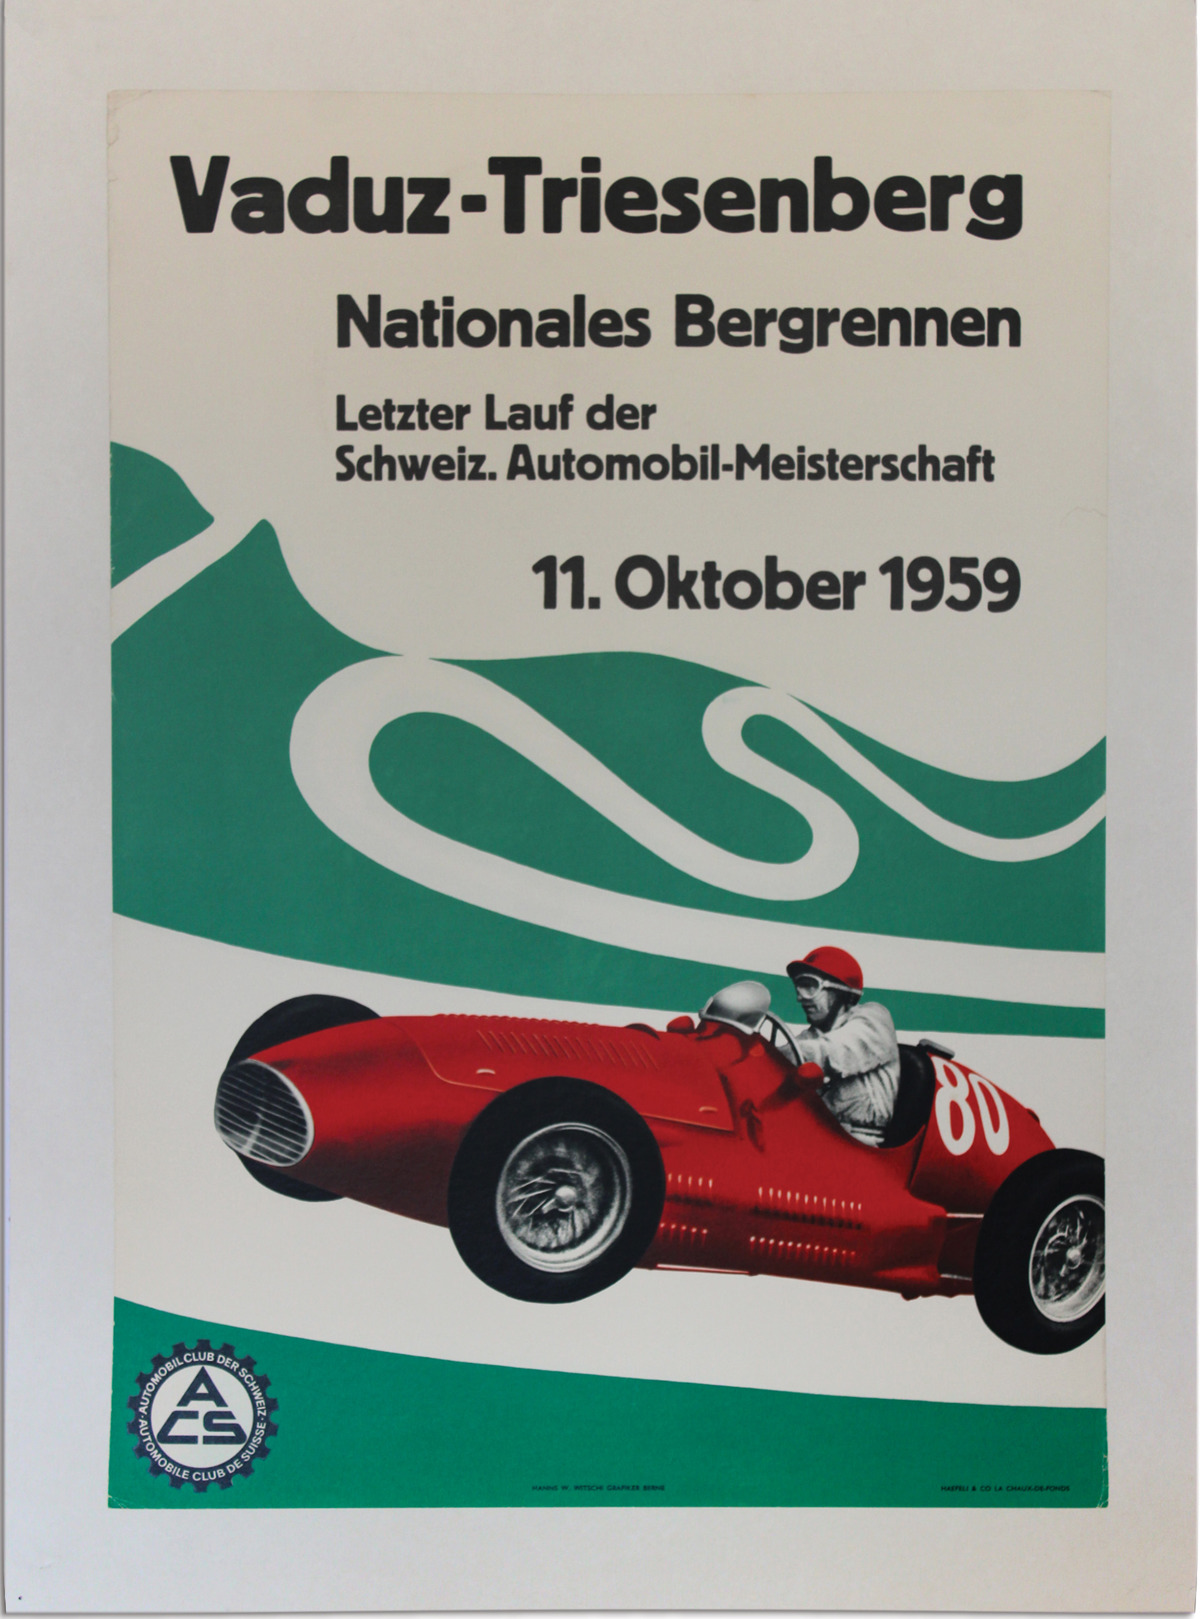 Vaduz-Triesenberg Nationales Bergrennen' October 11 1959 Event Poster offered in RM Sotheby's The Art of Competition 2020